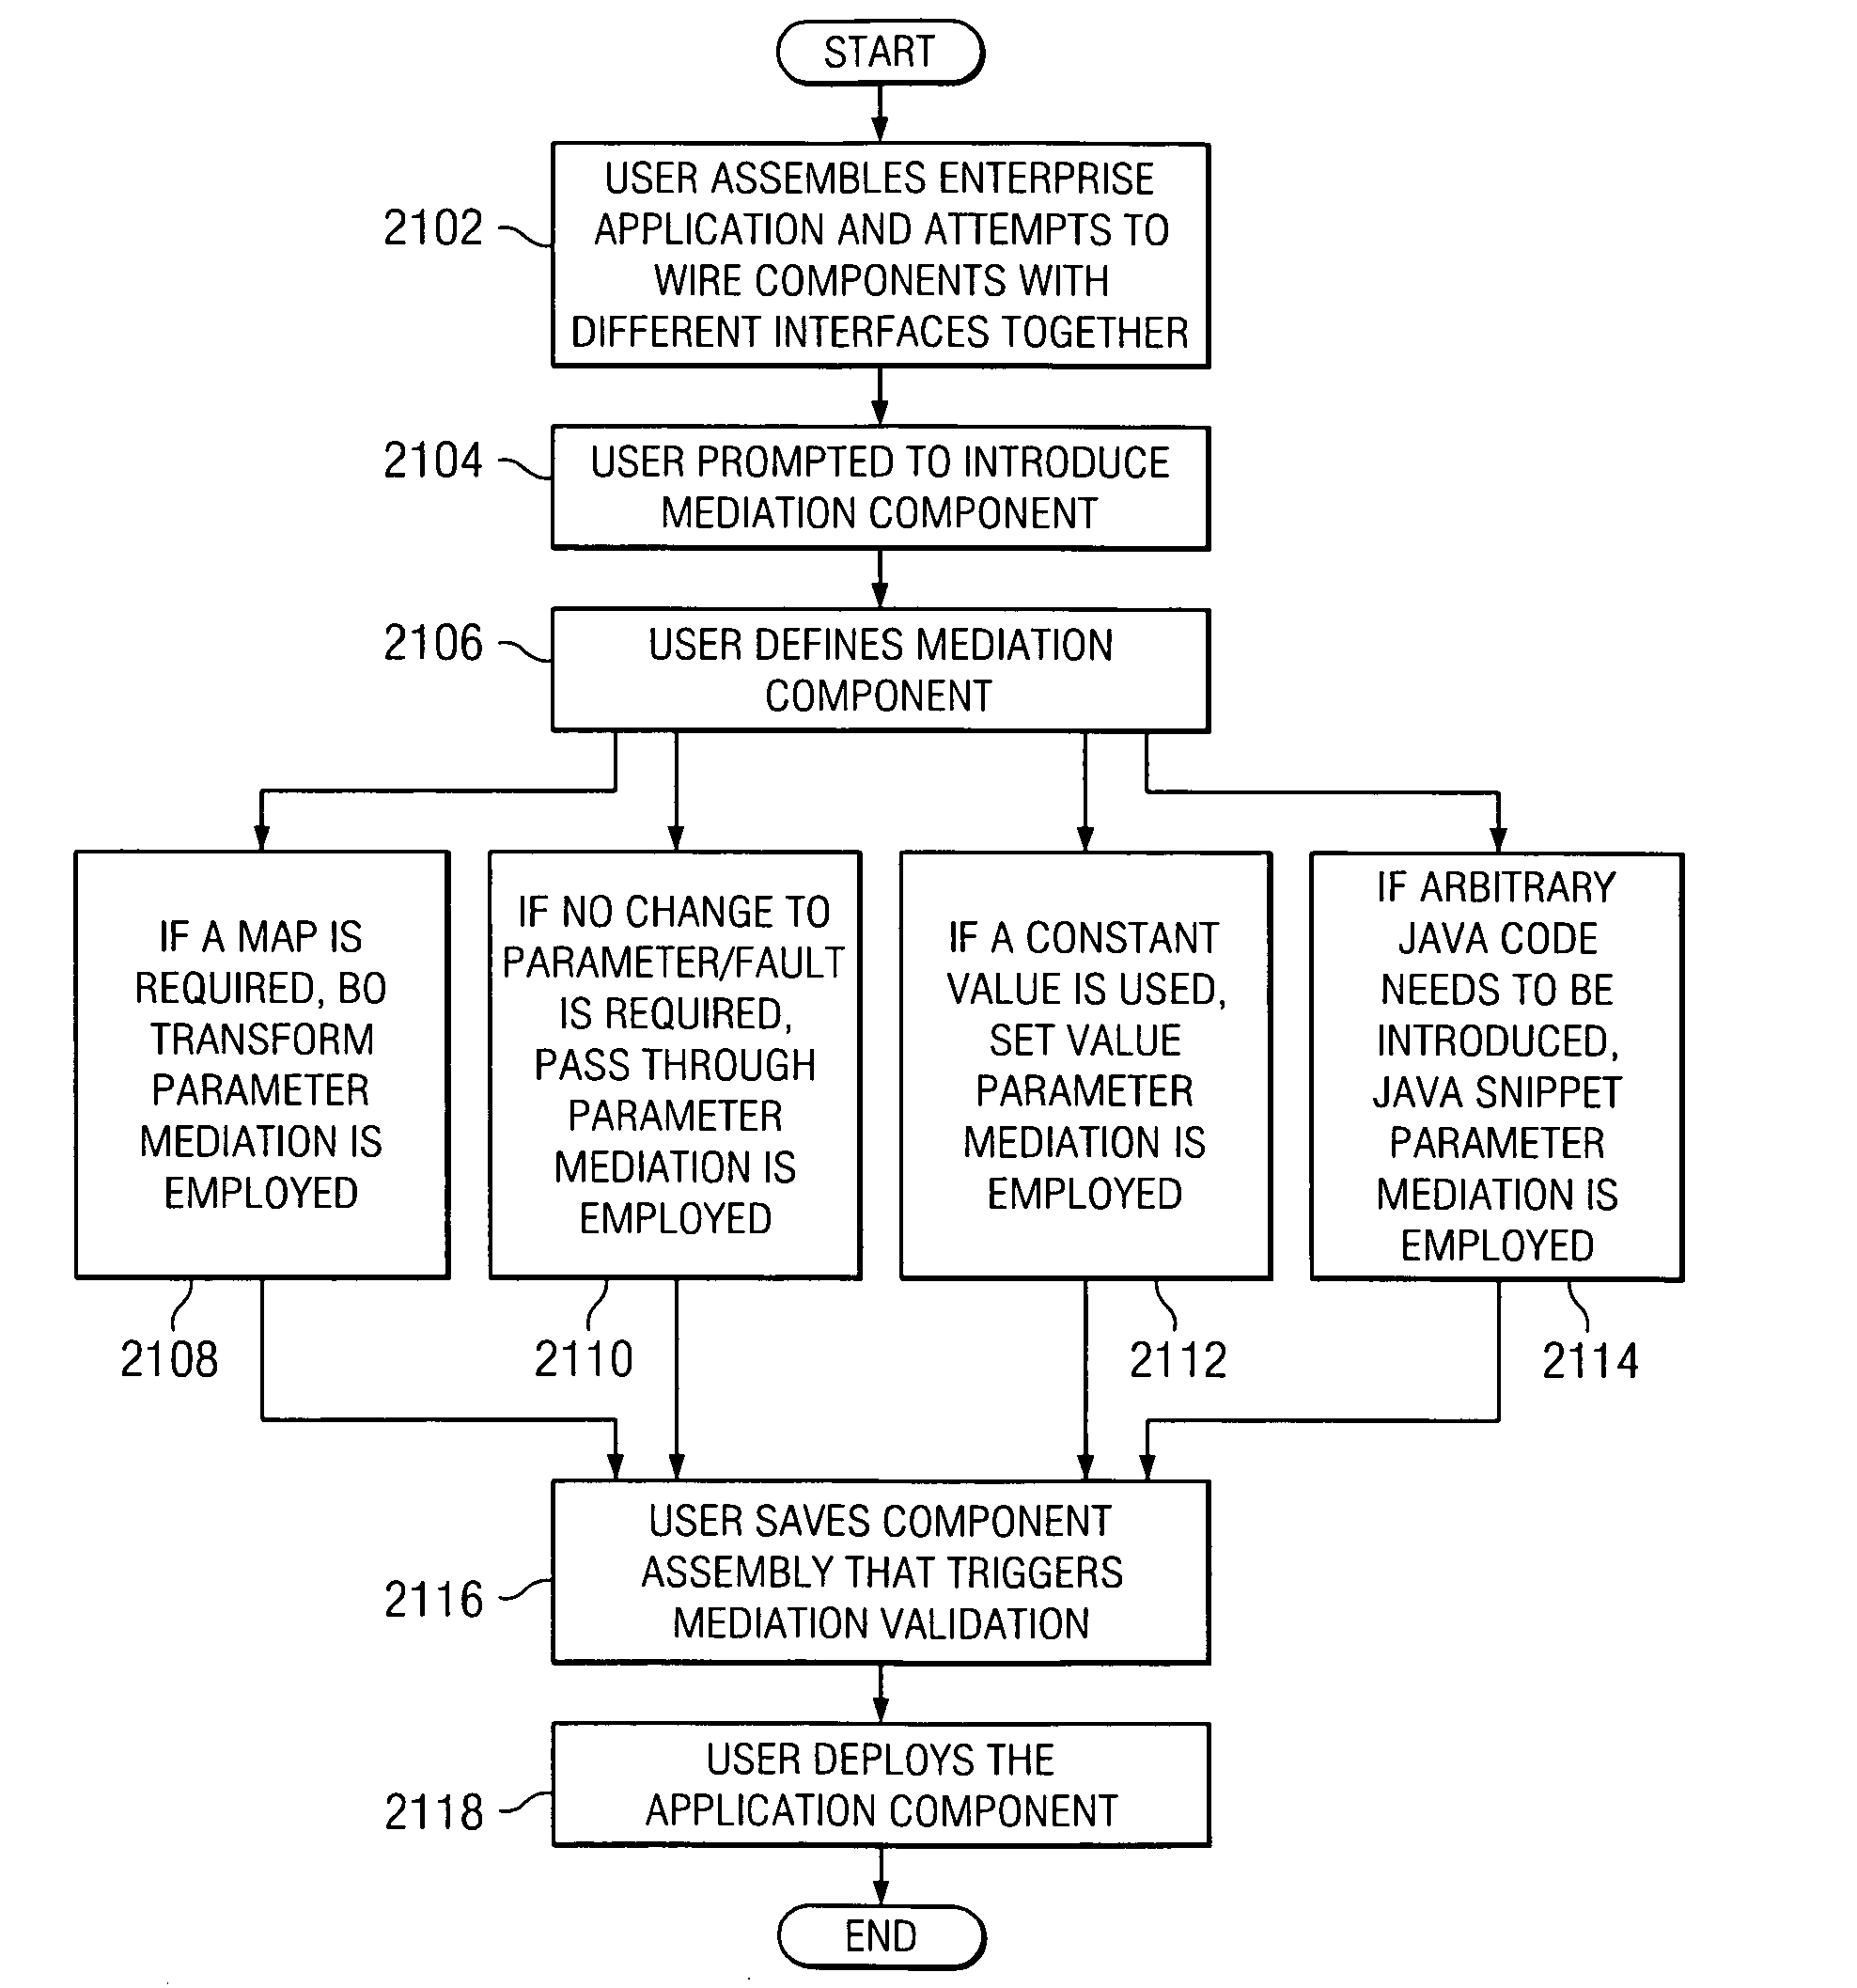 Generic framework for integrating components with different interfaces in an enterprise application intergration environment